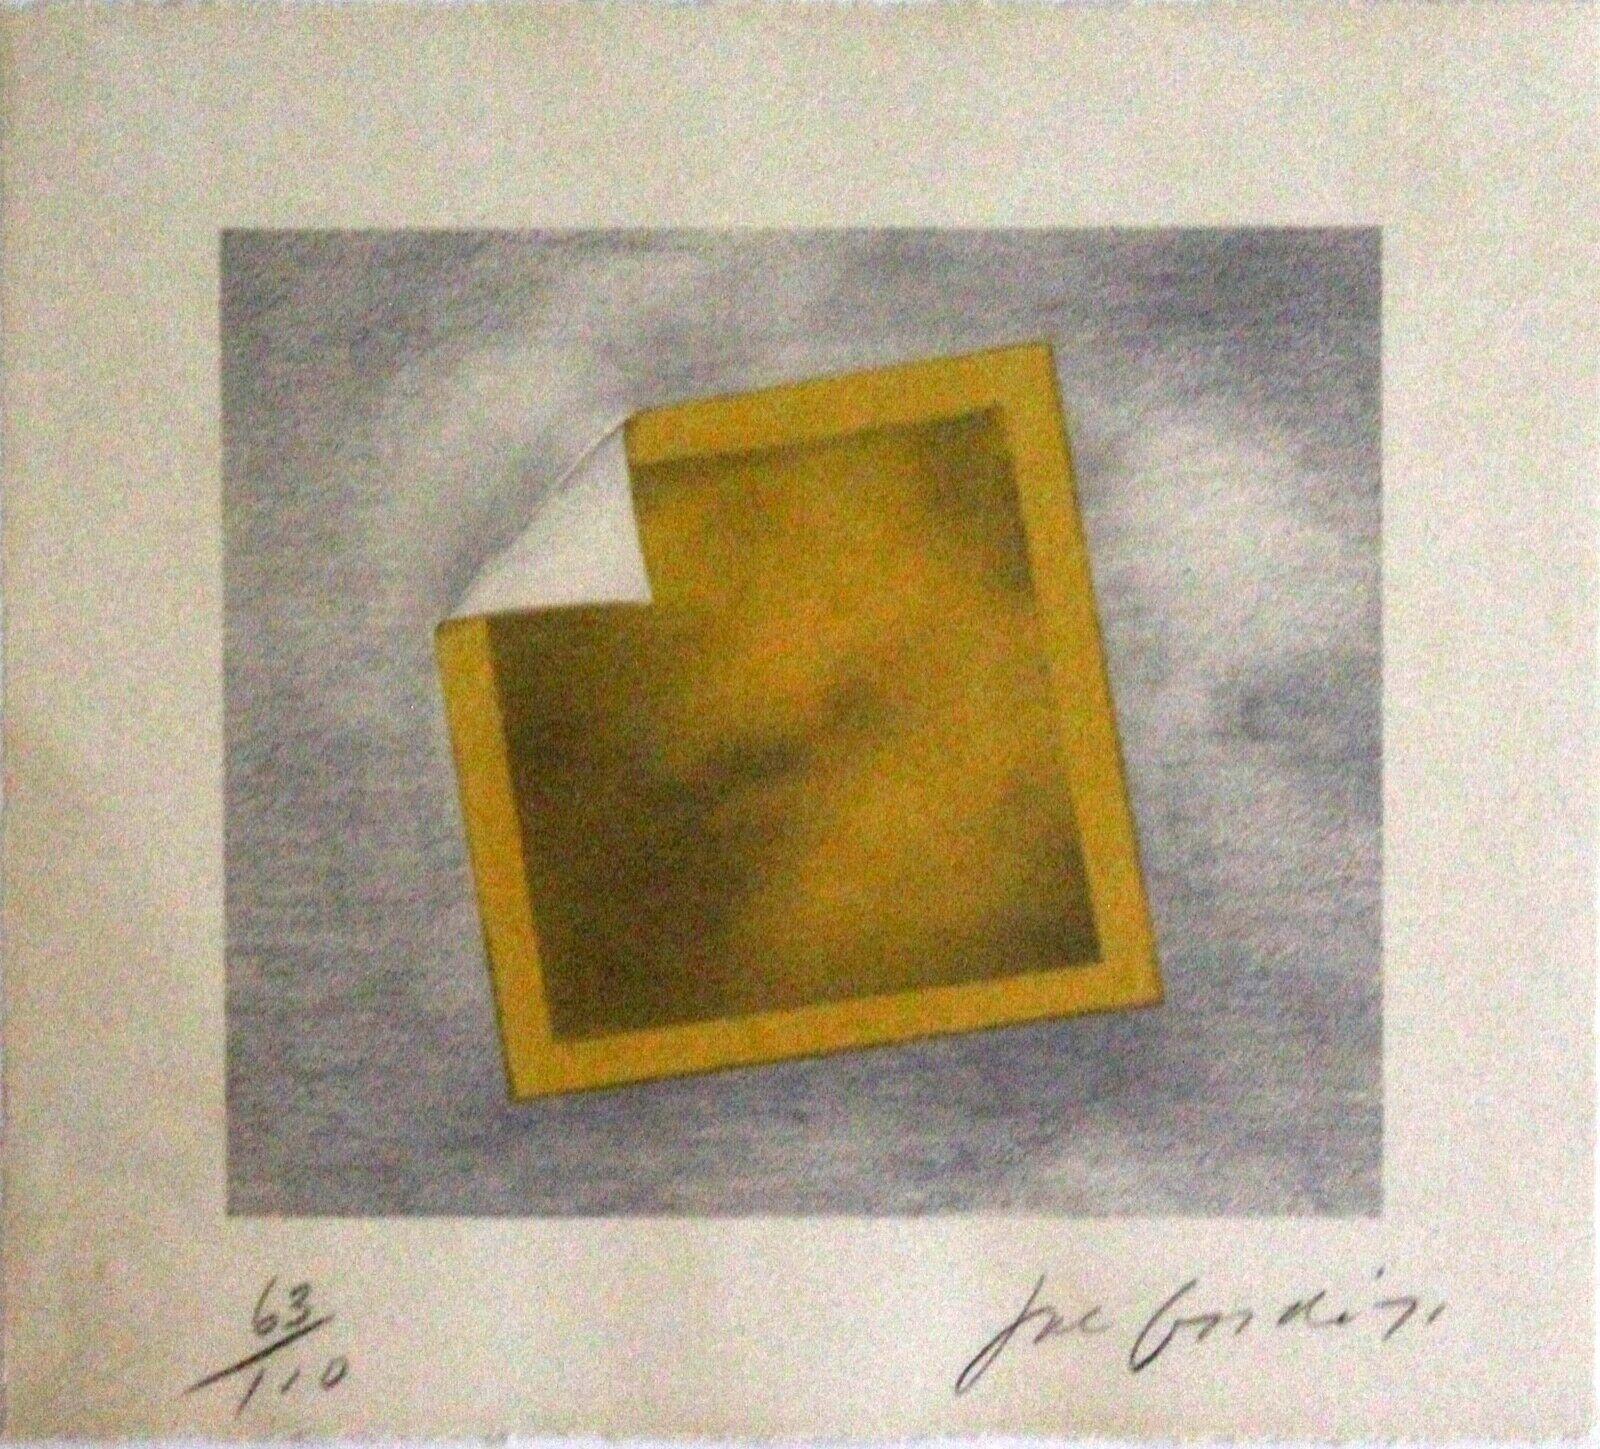 We are in Michigan offering this cerebral limited edition Untitled 1971 lithograph depicting a yellow folded photo, signed in pencil on the bottom right by Joe Goode, with an annotation of 63/110. Dimensions: 14.25